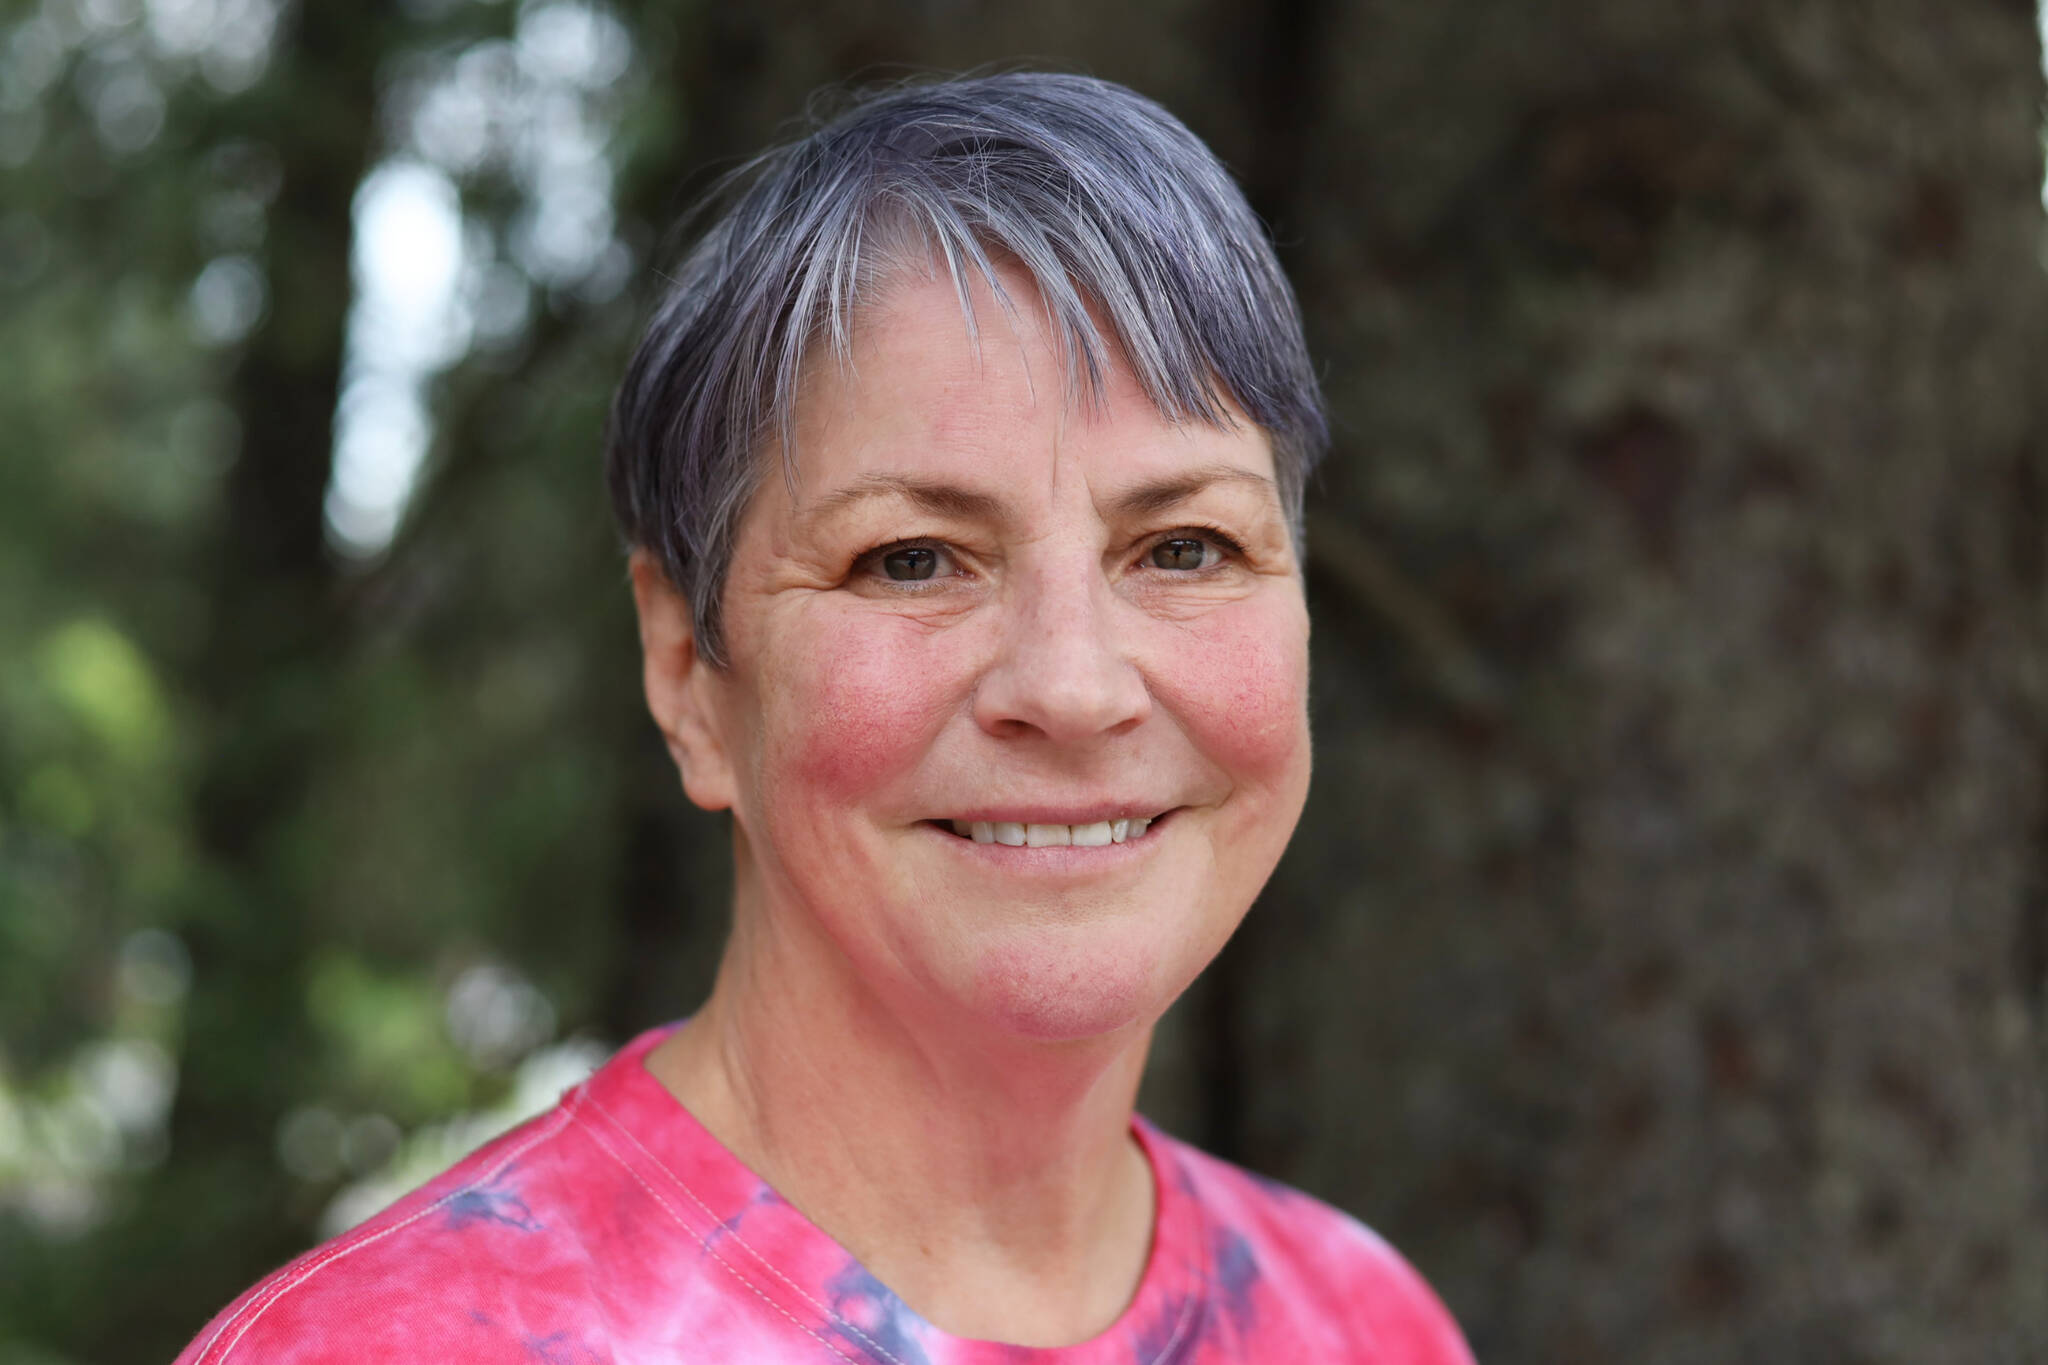 Michele Stuart-Morgan, pictured, is running as an Assembly Areawide candidate in the 2023 City and Borough of Juneau municipal election. (Clarise Larson / Juneau Empire)